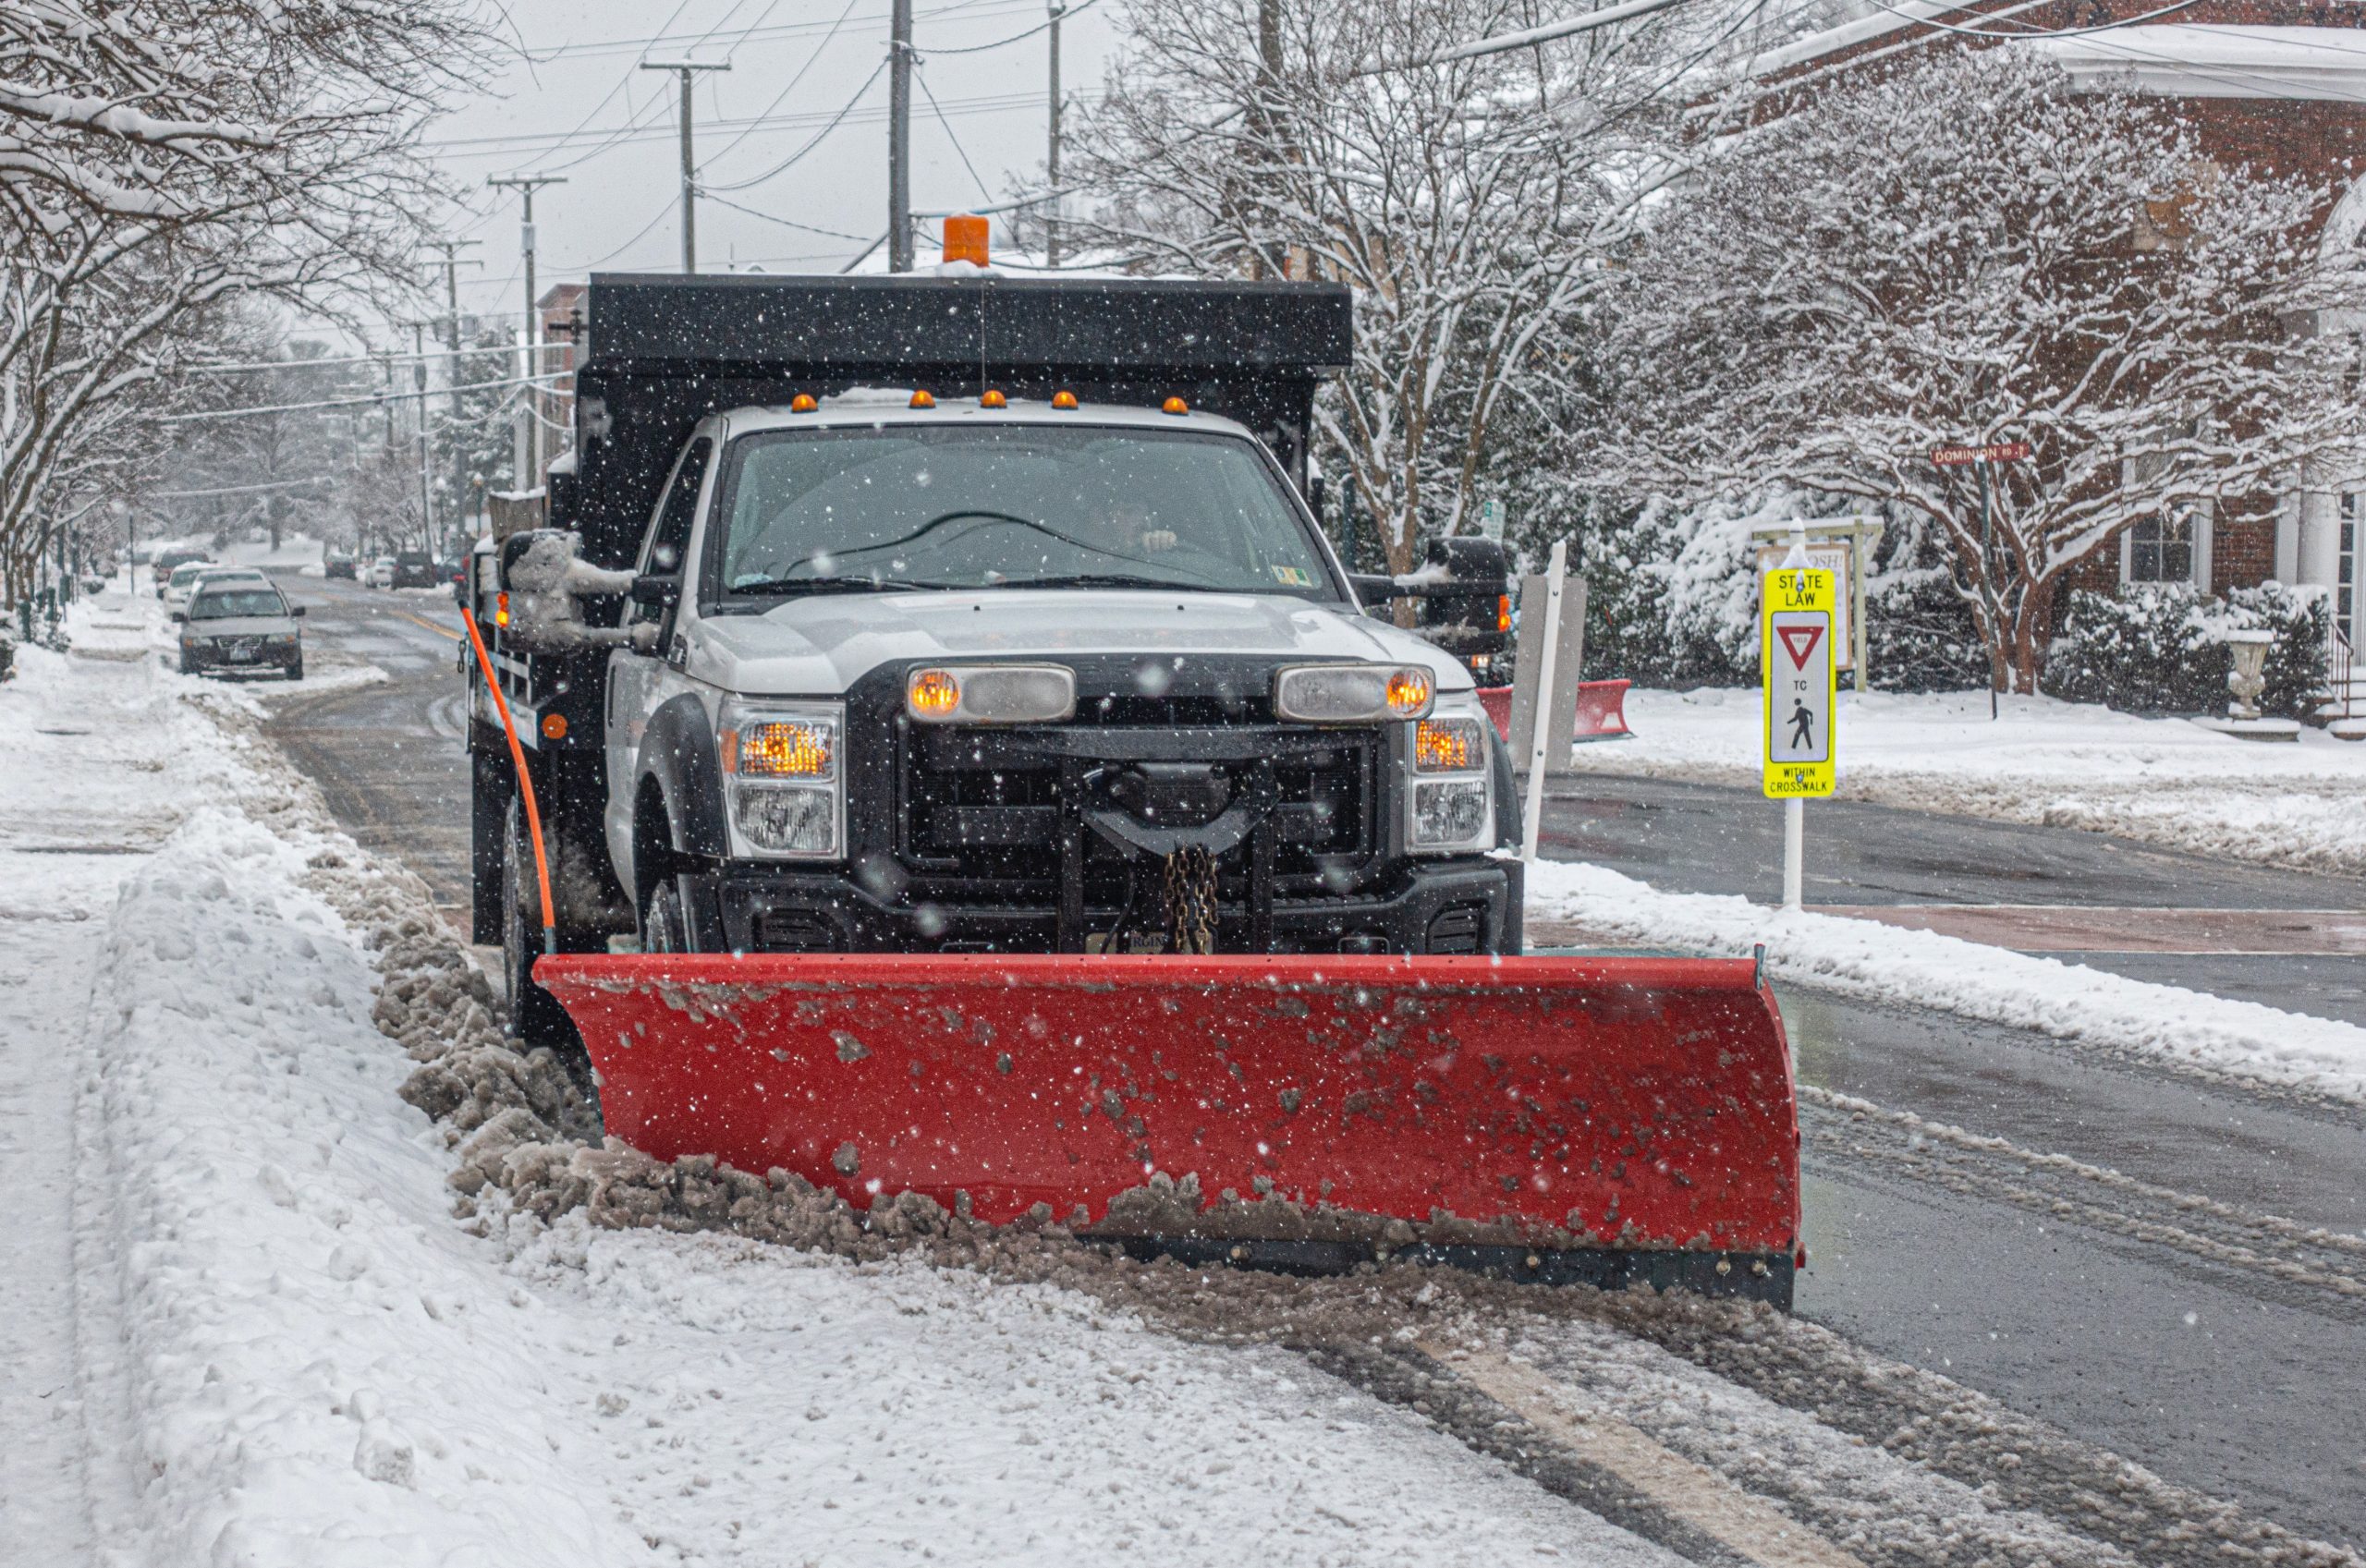 Snowplow Truck Cleaning Road During a Blizzard Snow Storm